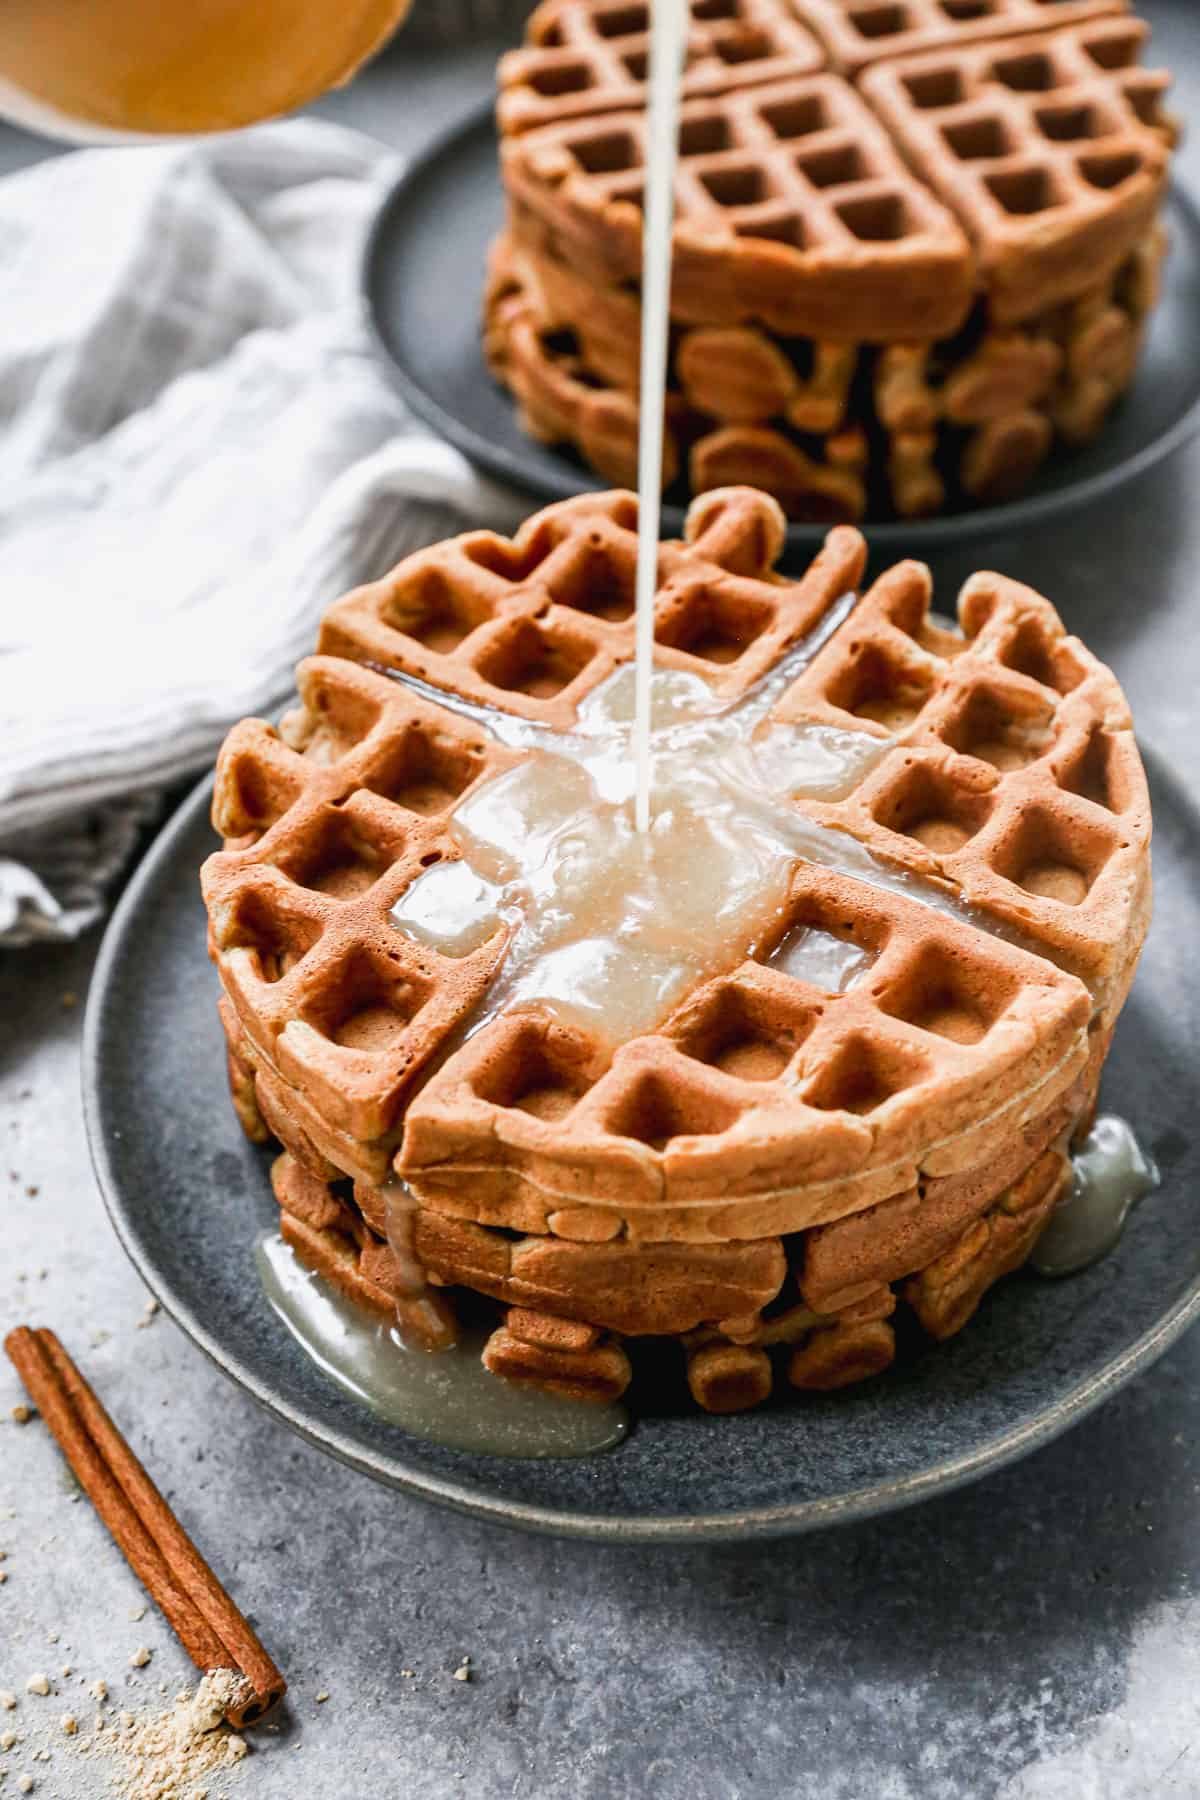 Vanilla syrup being poured on top of the best Gingerbread Waffles.